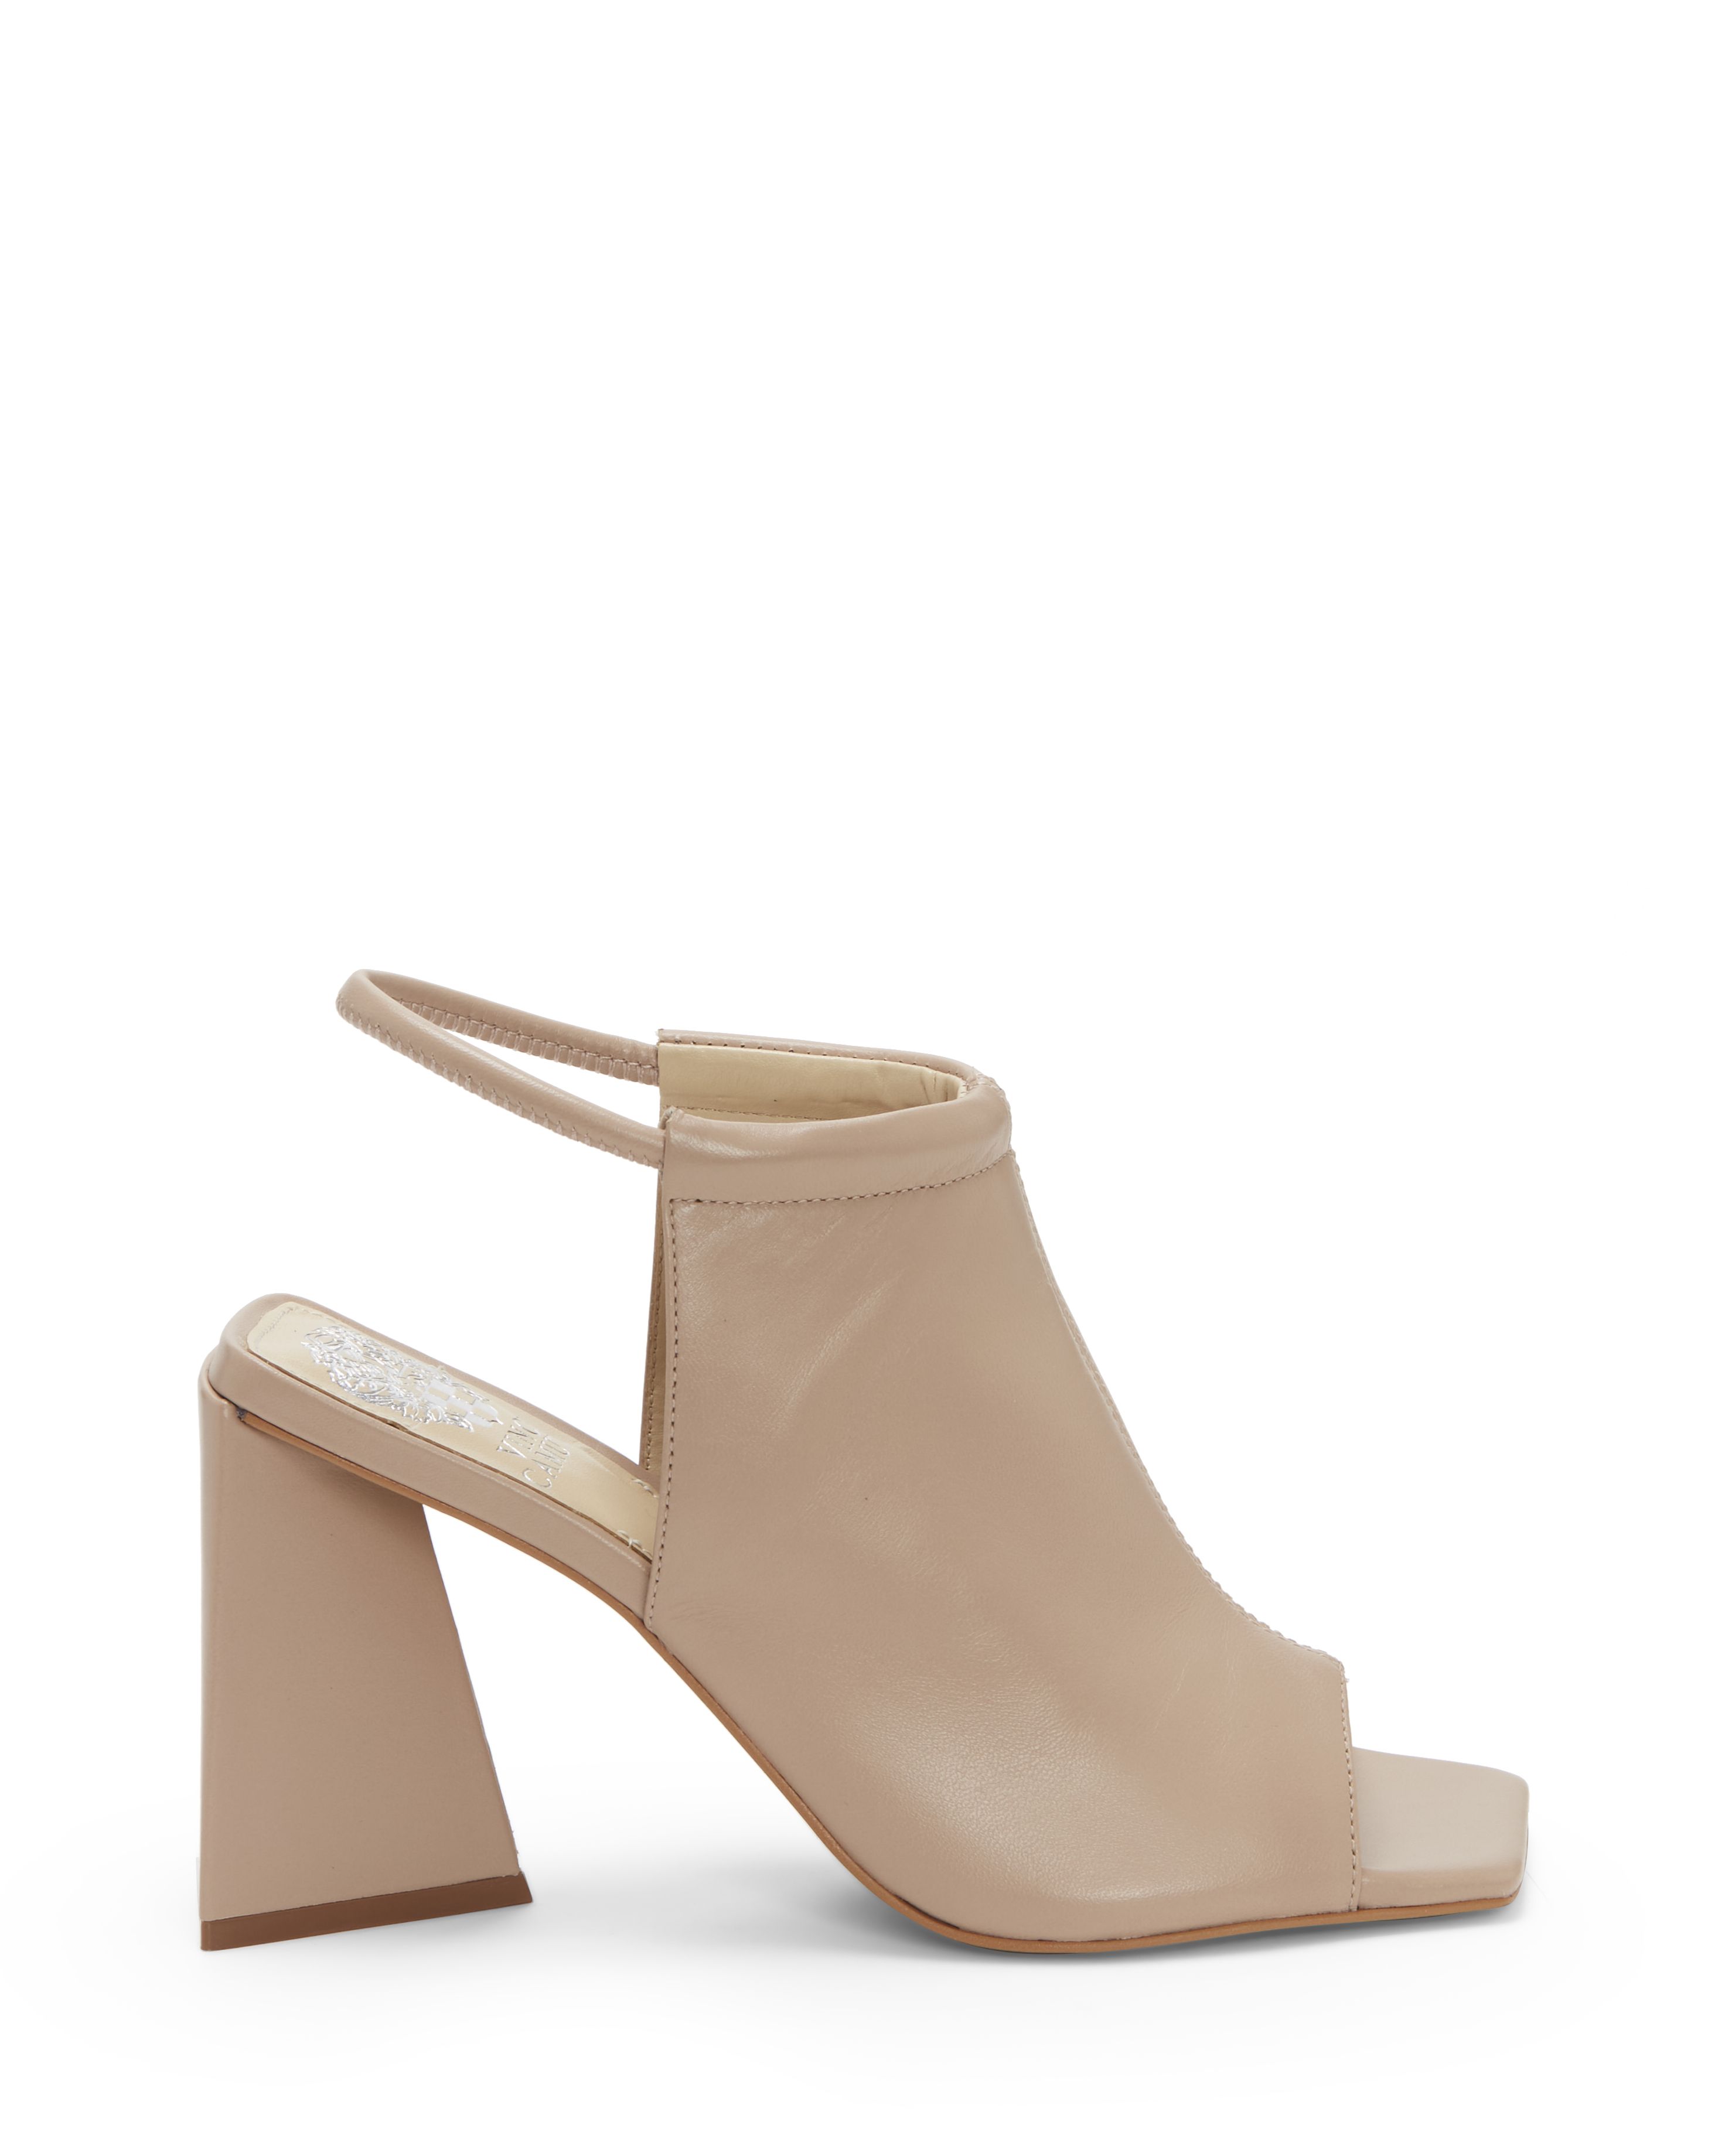 Avangila Heel - EXCLUDED FROM PROMOTION | Vince Camuto